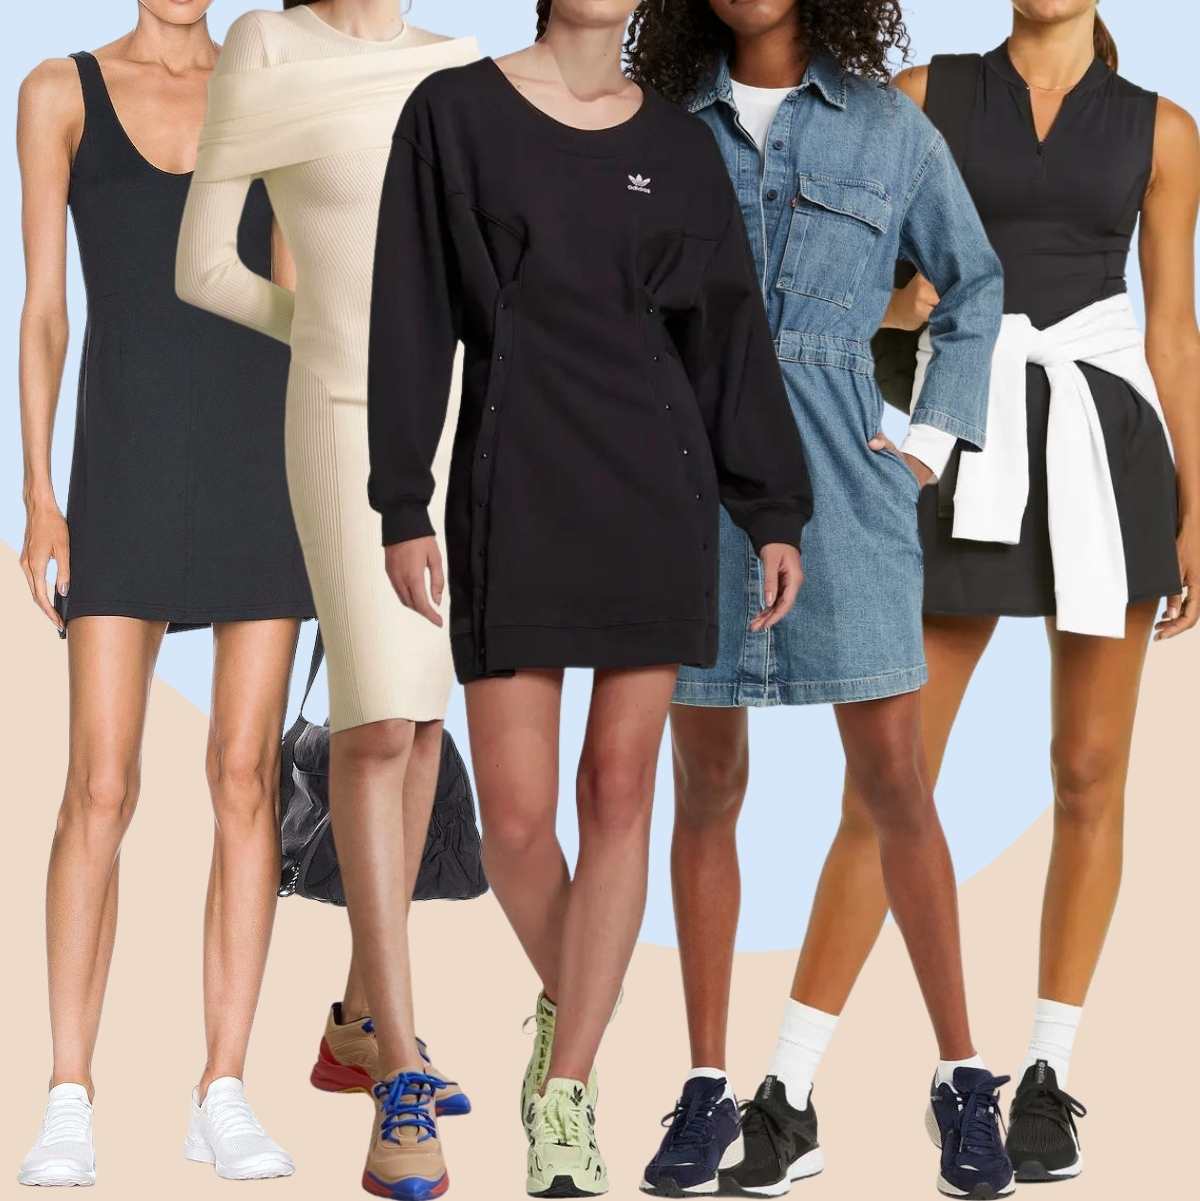 Collage of 5 women wearing athletic sneakers with dresses.